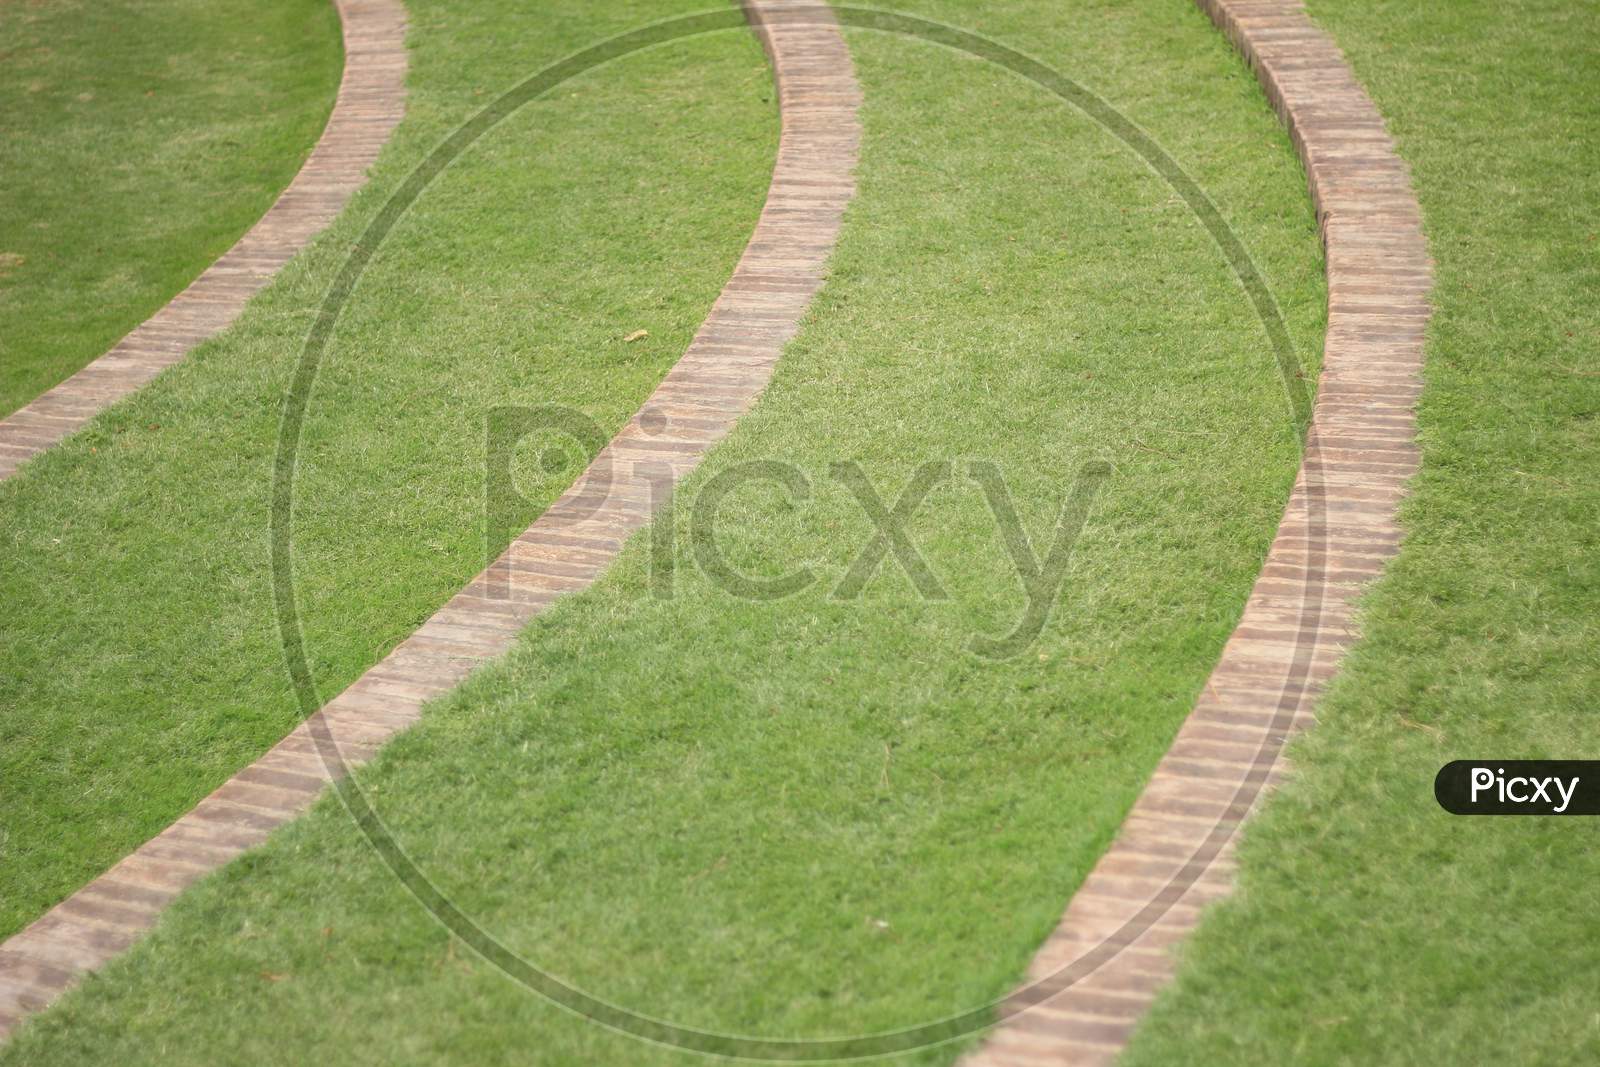 A Circular steps in the lawn